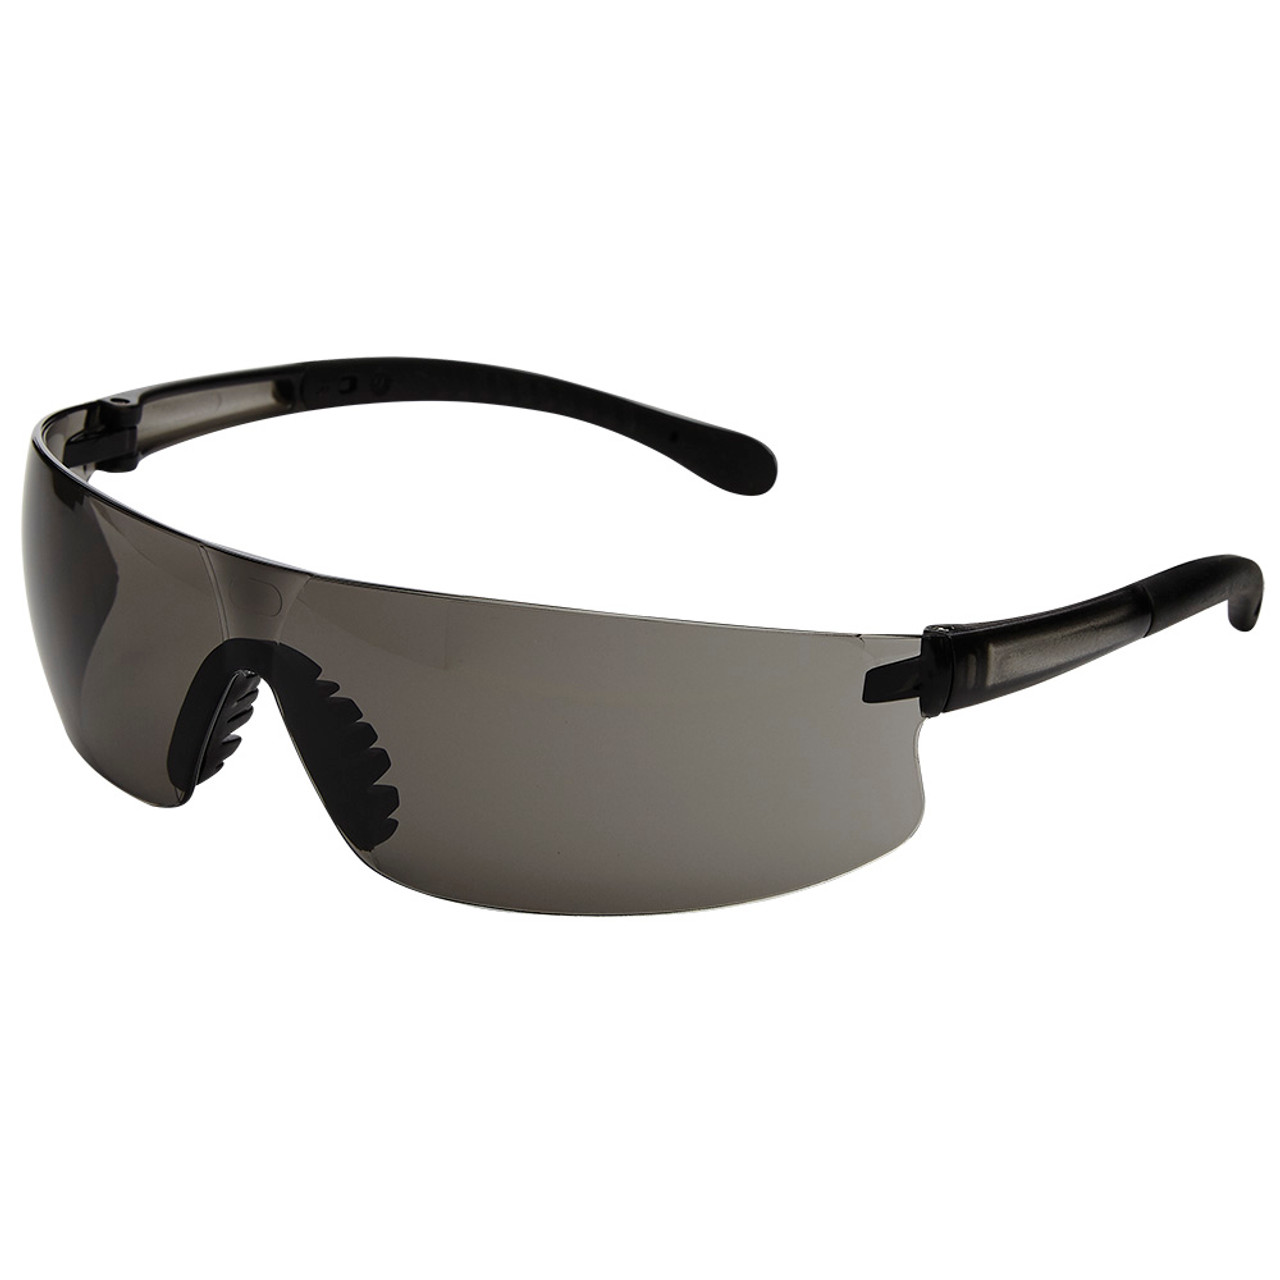 Sellstrom® XM330 Series Hard Coated Wrap Around Safety Glasses - Smoke Tint - Black Rubberized Arms  S73621